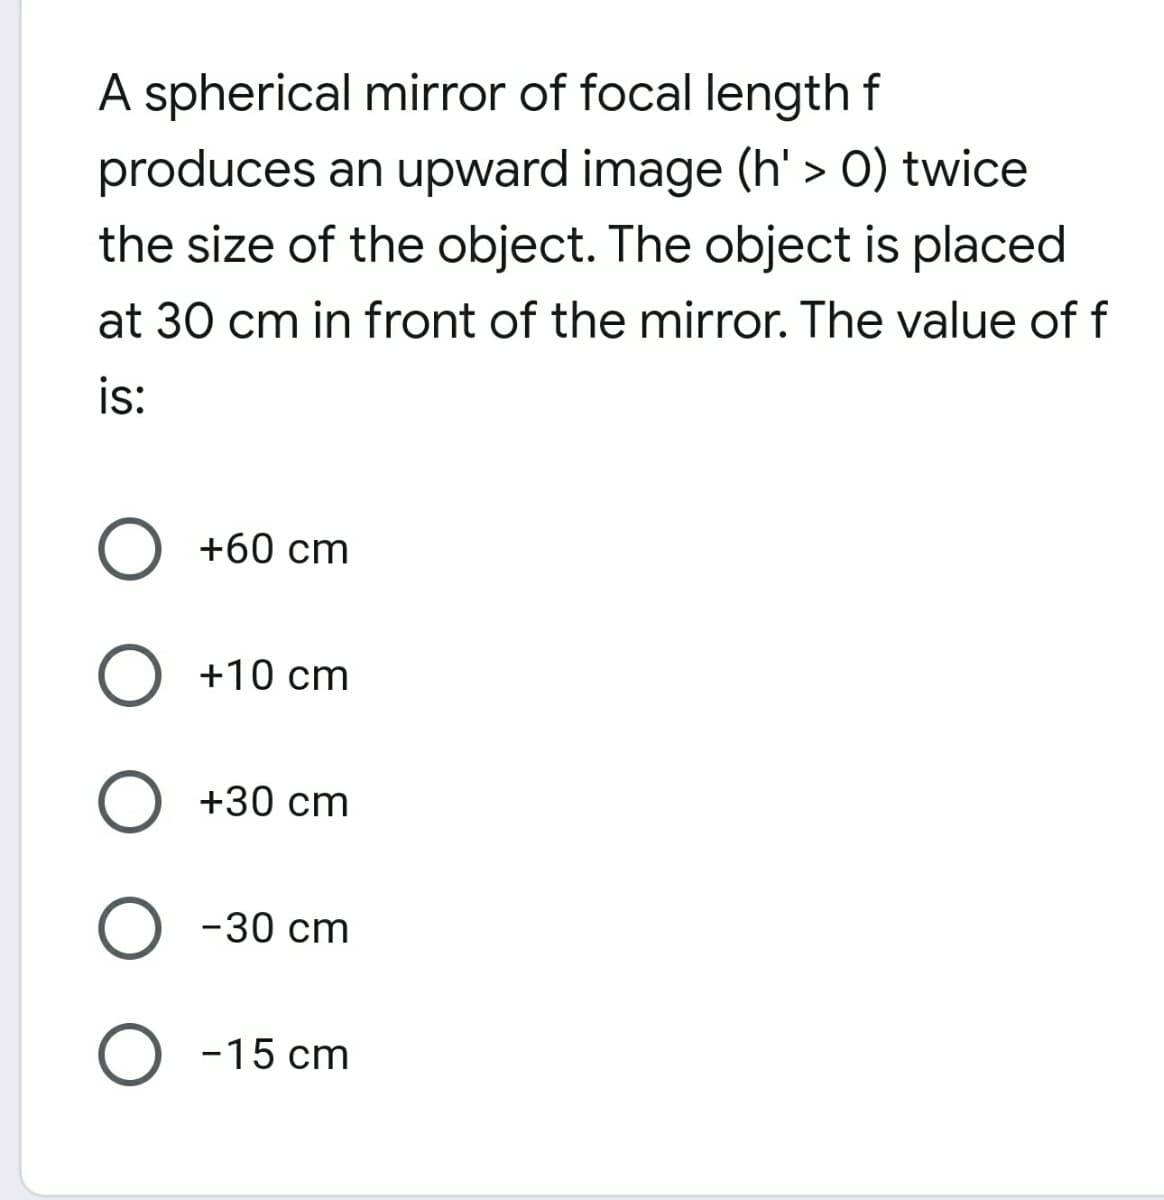 A spherical miror of focal length f
produces an upward image (h' > 0) twice
the size of the object. The object is placed
at 30 cm in front of the mirror. The value of f
is:
+60 cm
+10 cm
+30 cm
-30 cm
O -15 cm
